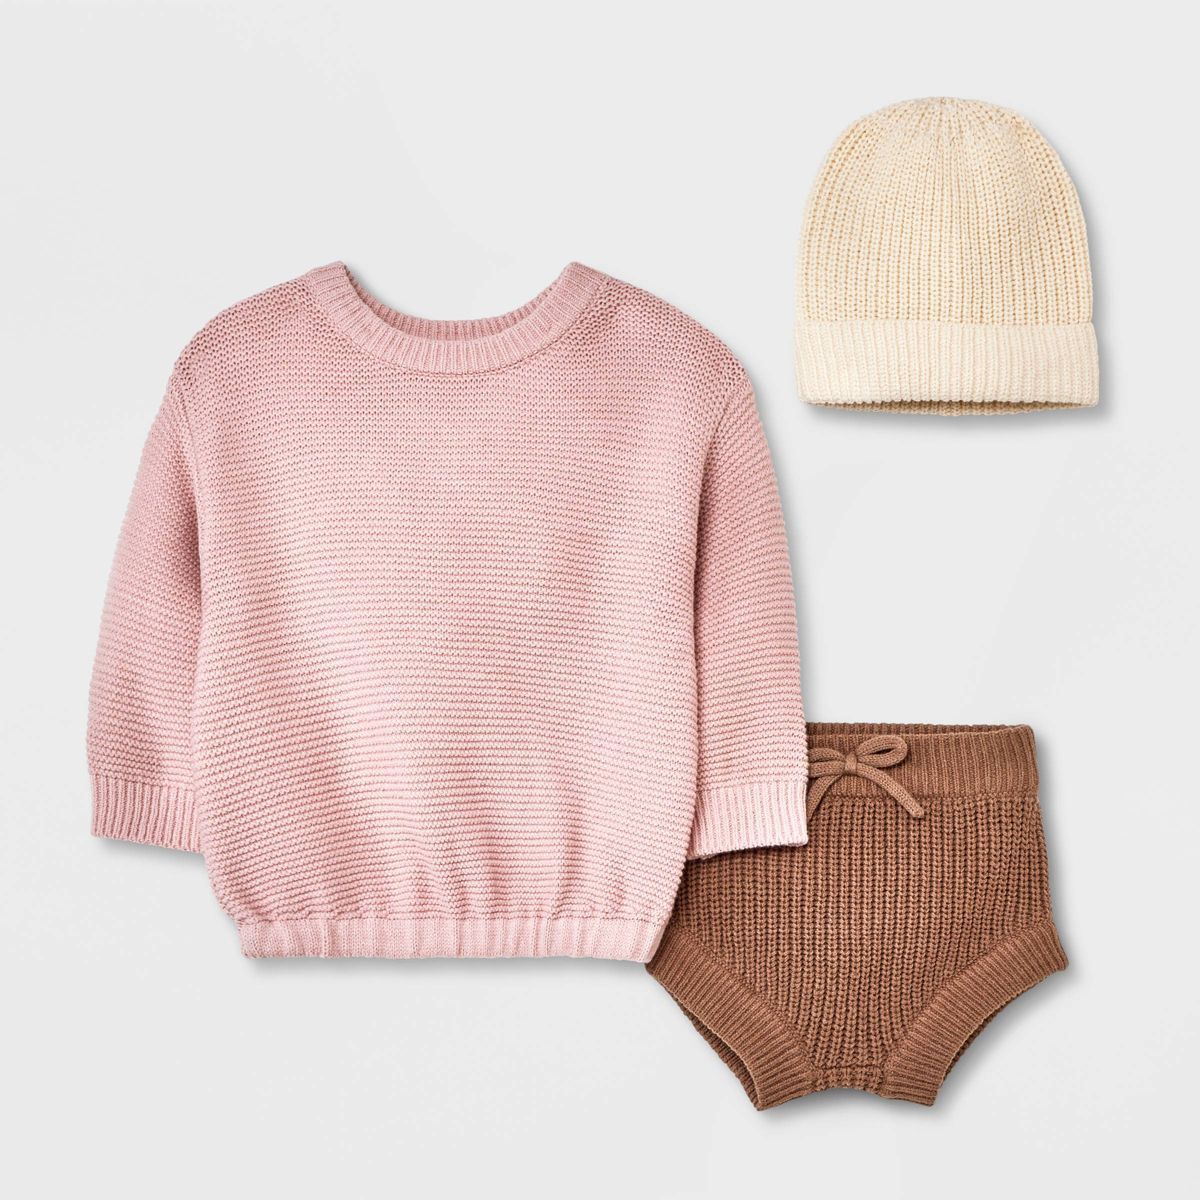 Grayson Collective Baby Girls' Beanie & Sweater Set - Pink/Brown | Target